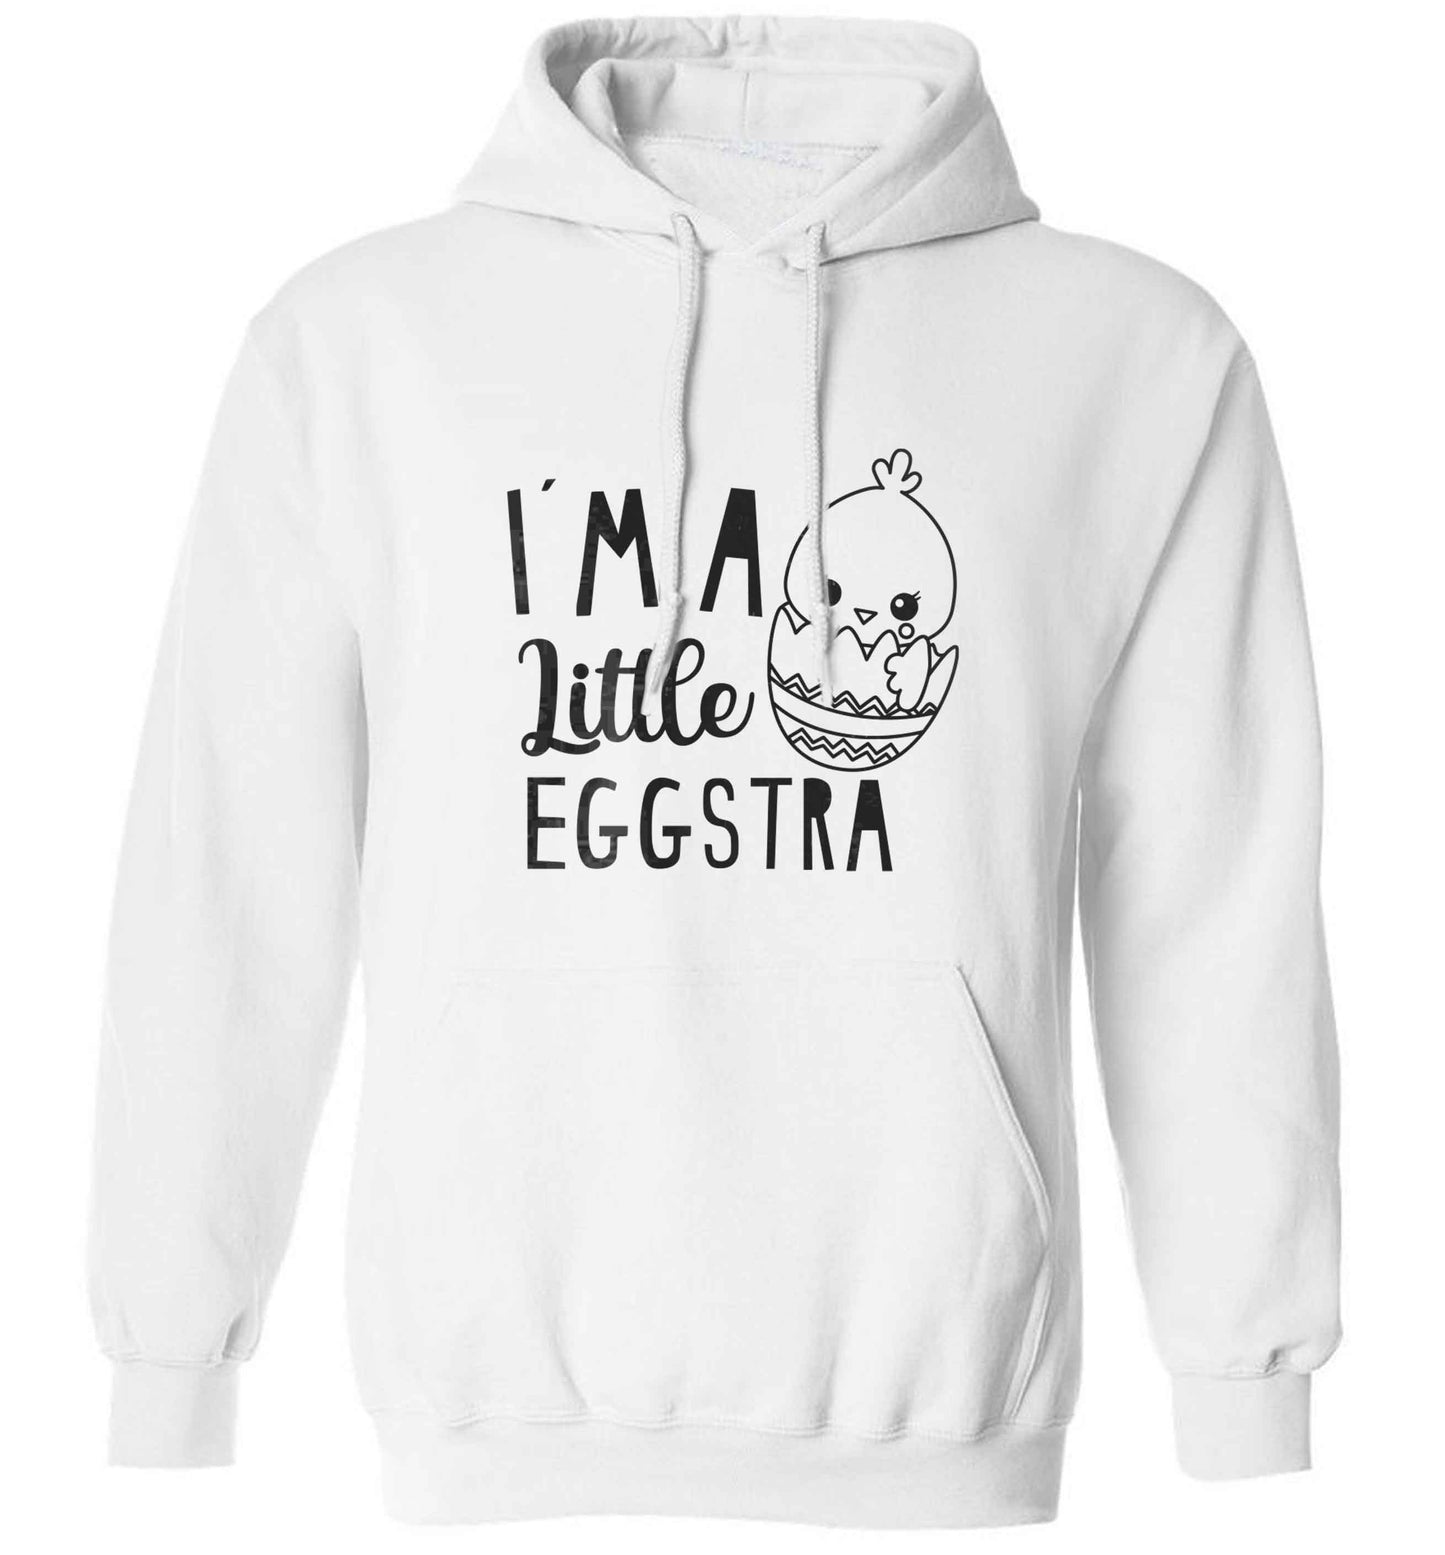 I'm a little eggstra adults unisex white hoodie 2XL